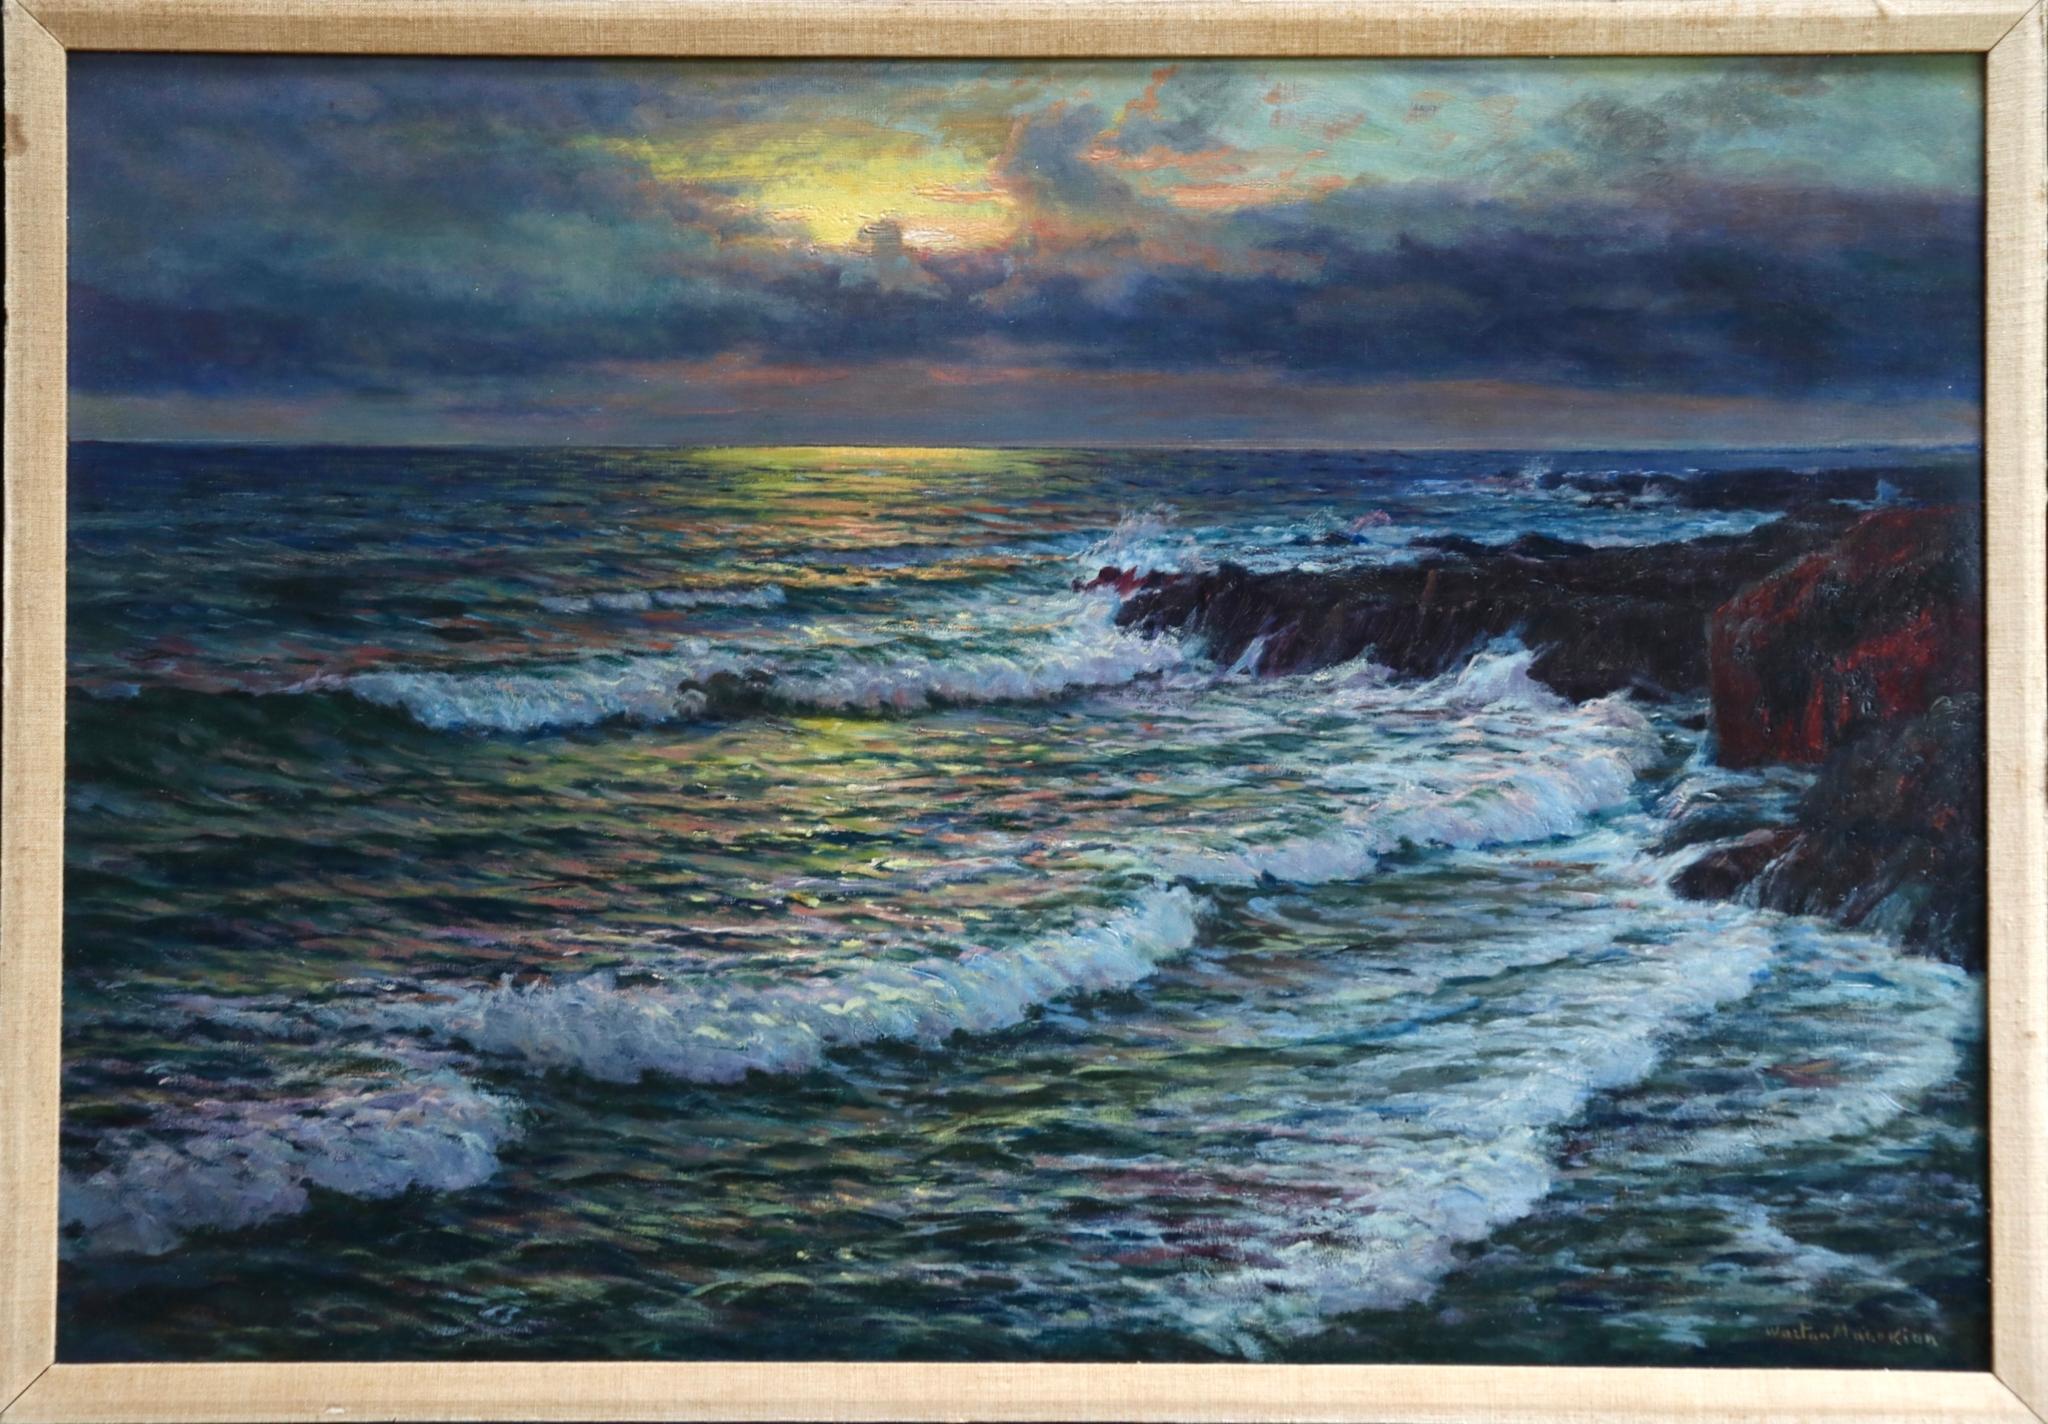 A stunning large oil on canvas by Armenian painter Wartan Mahokian depicting a coastal scene - the setting sun reflecting on waves crashing against rocks. The colours and the use of light and shade a simply beautiful. 

Signature:
Signed lower